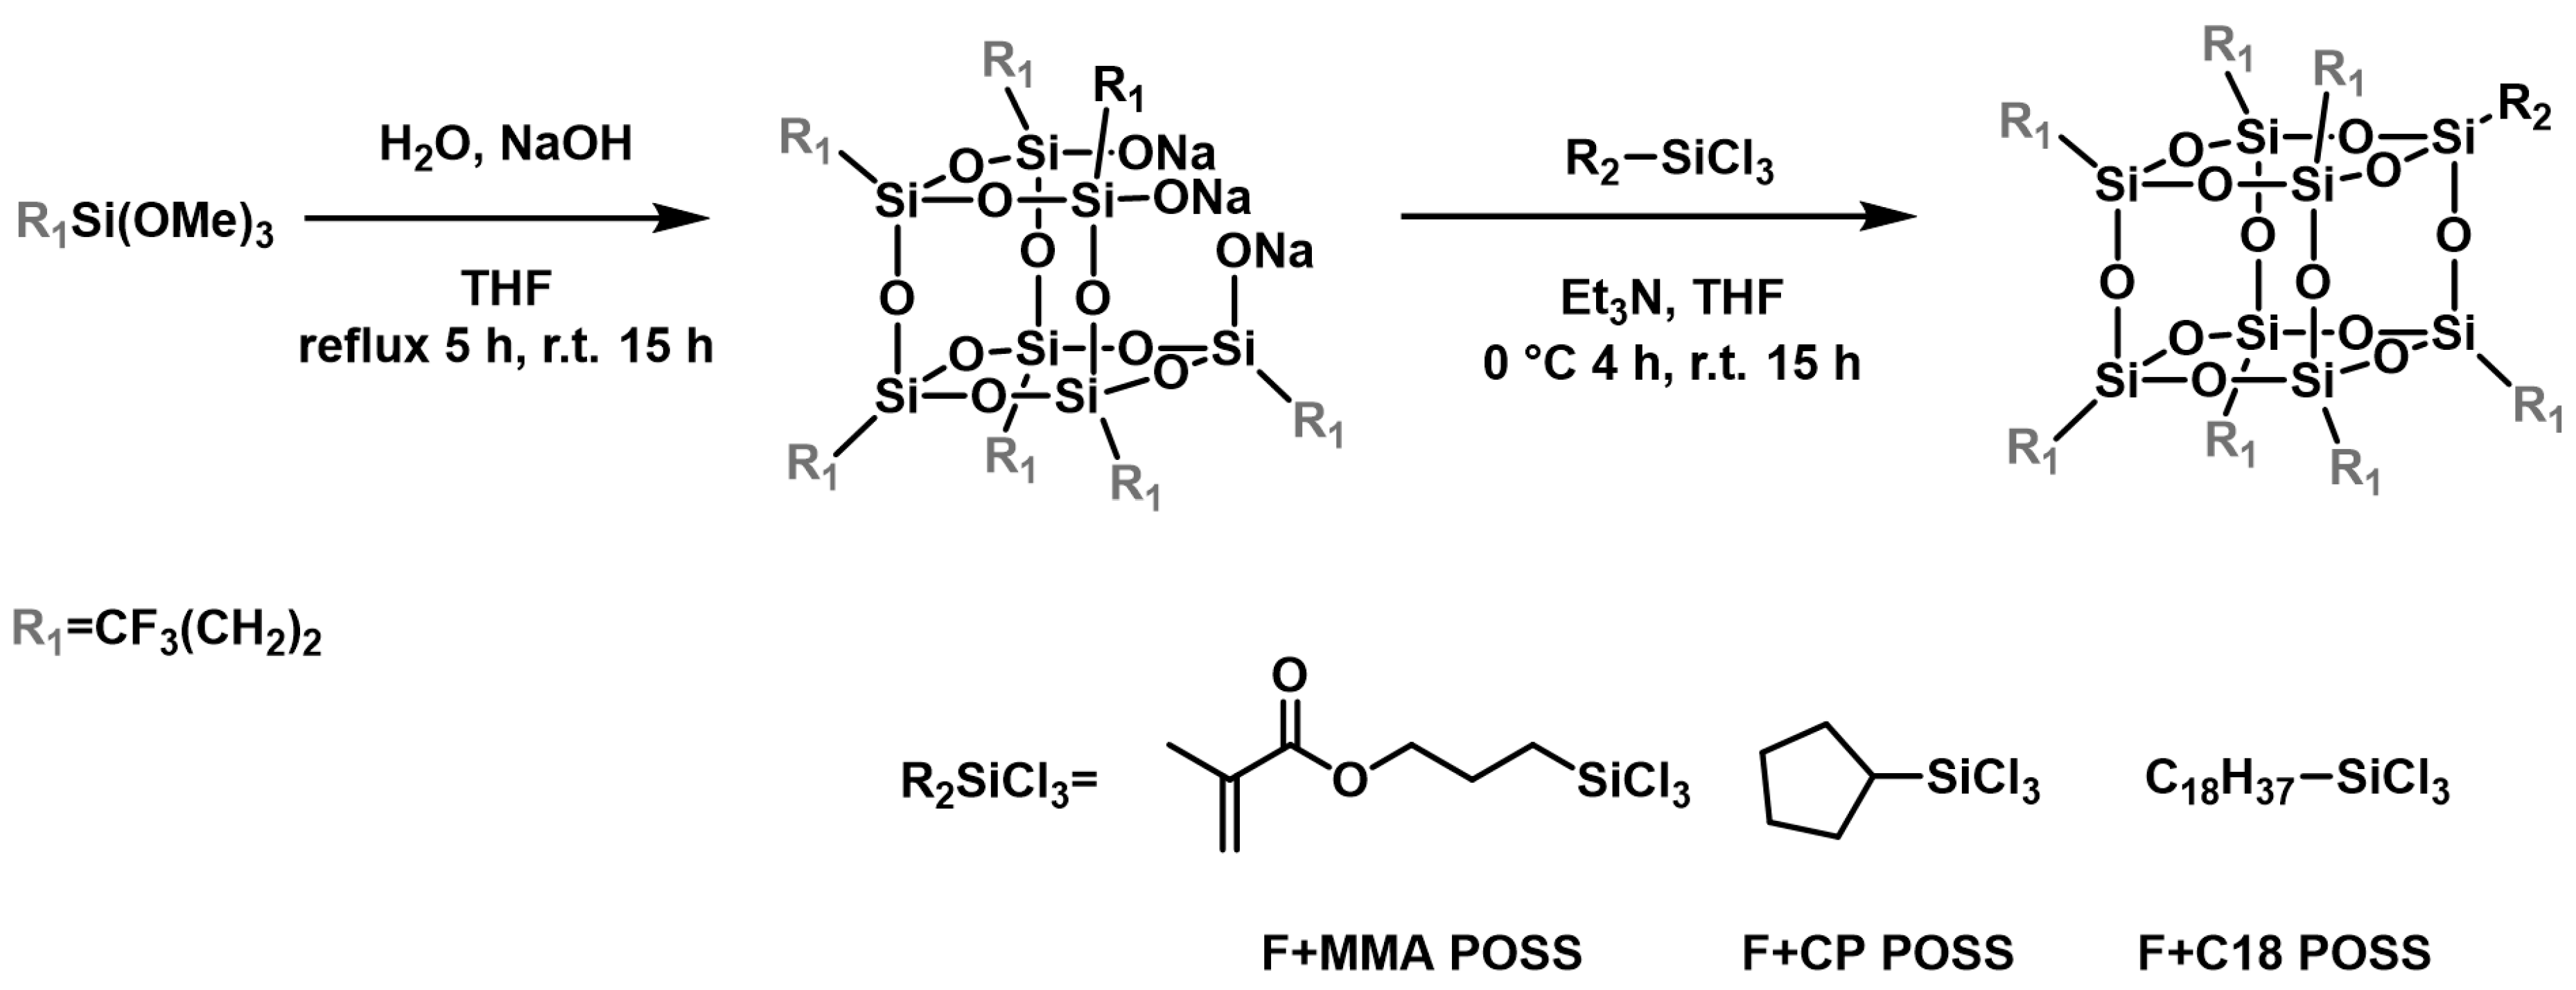 Polymers Free Full Text Fluoroalkyl Poss With Dual Functional Groups As A Molecular Filler For Lowering Refractive Indices And Improving Thermomechanical Properties Of Pmma Html